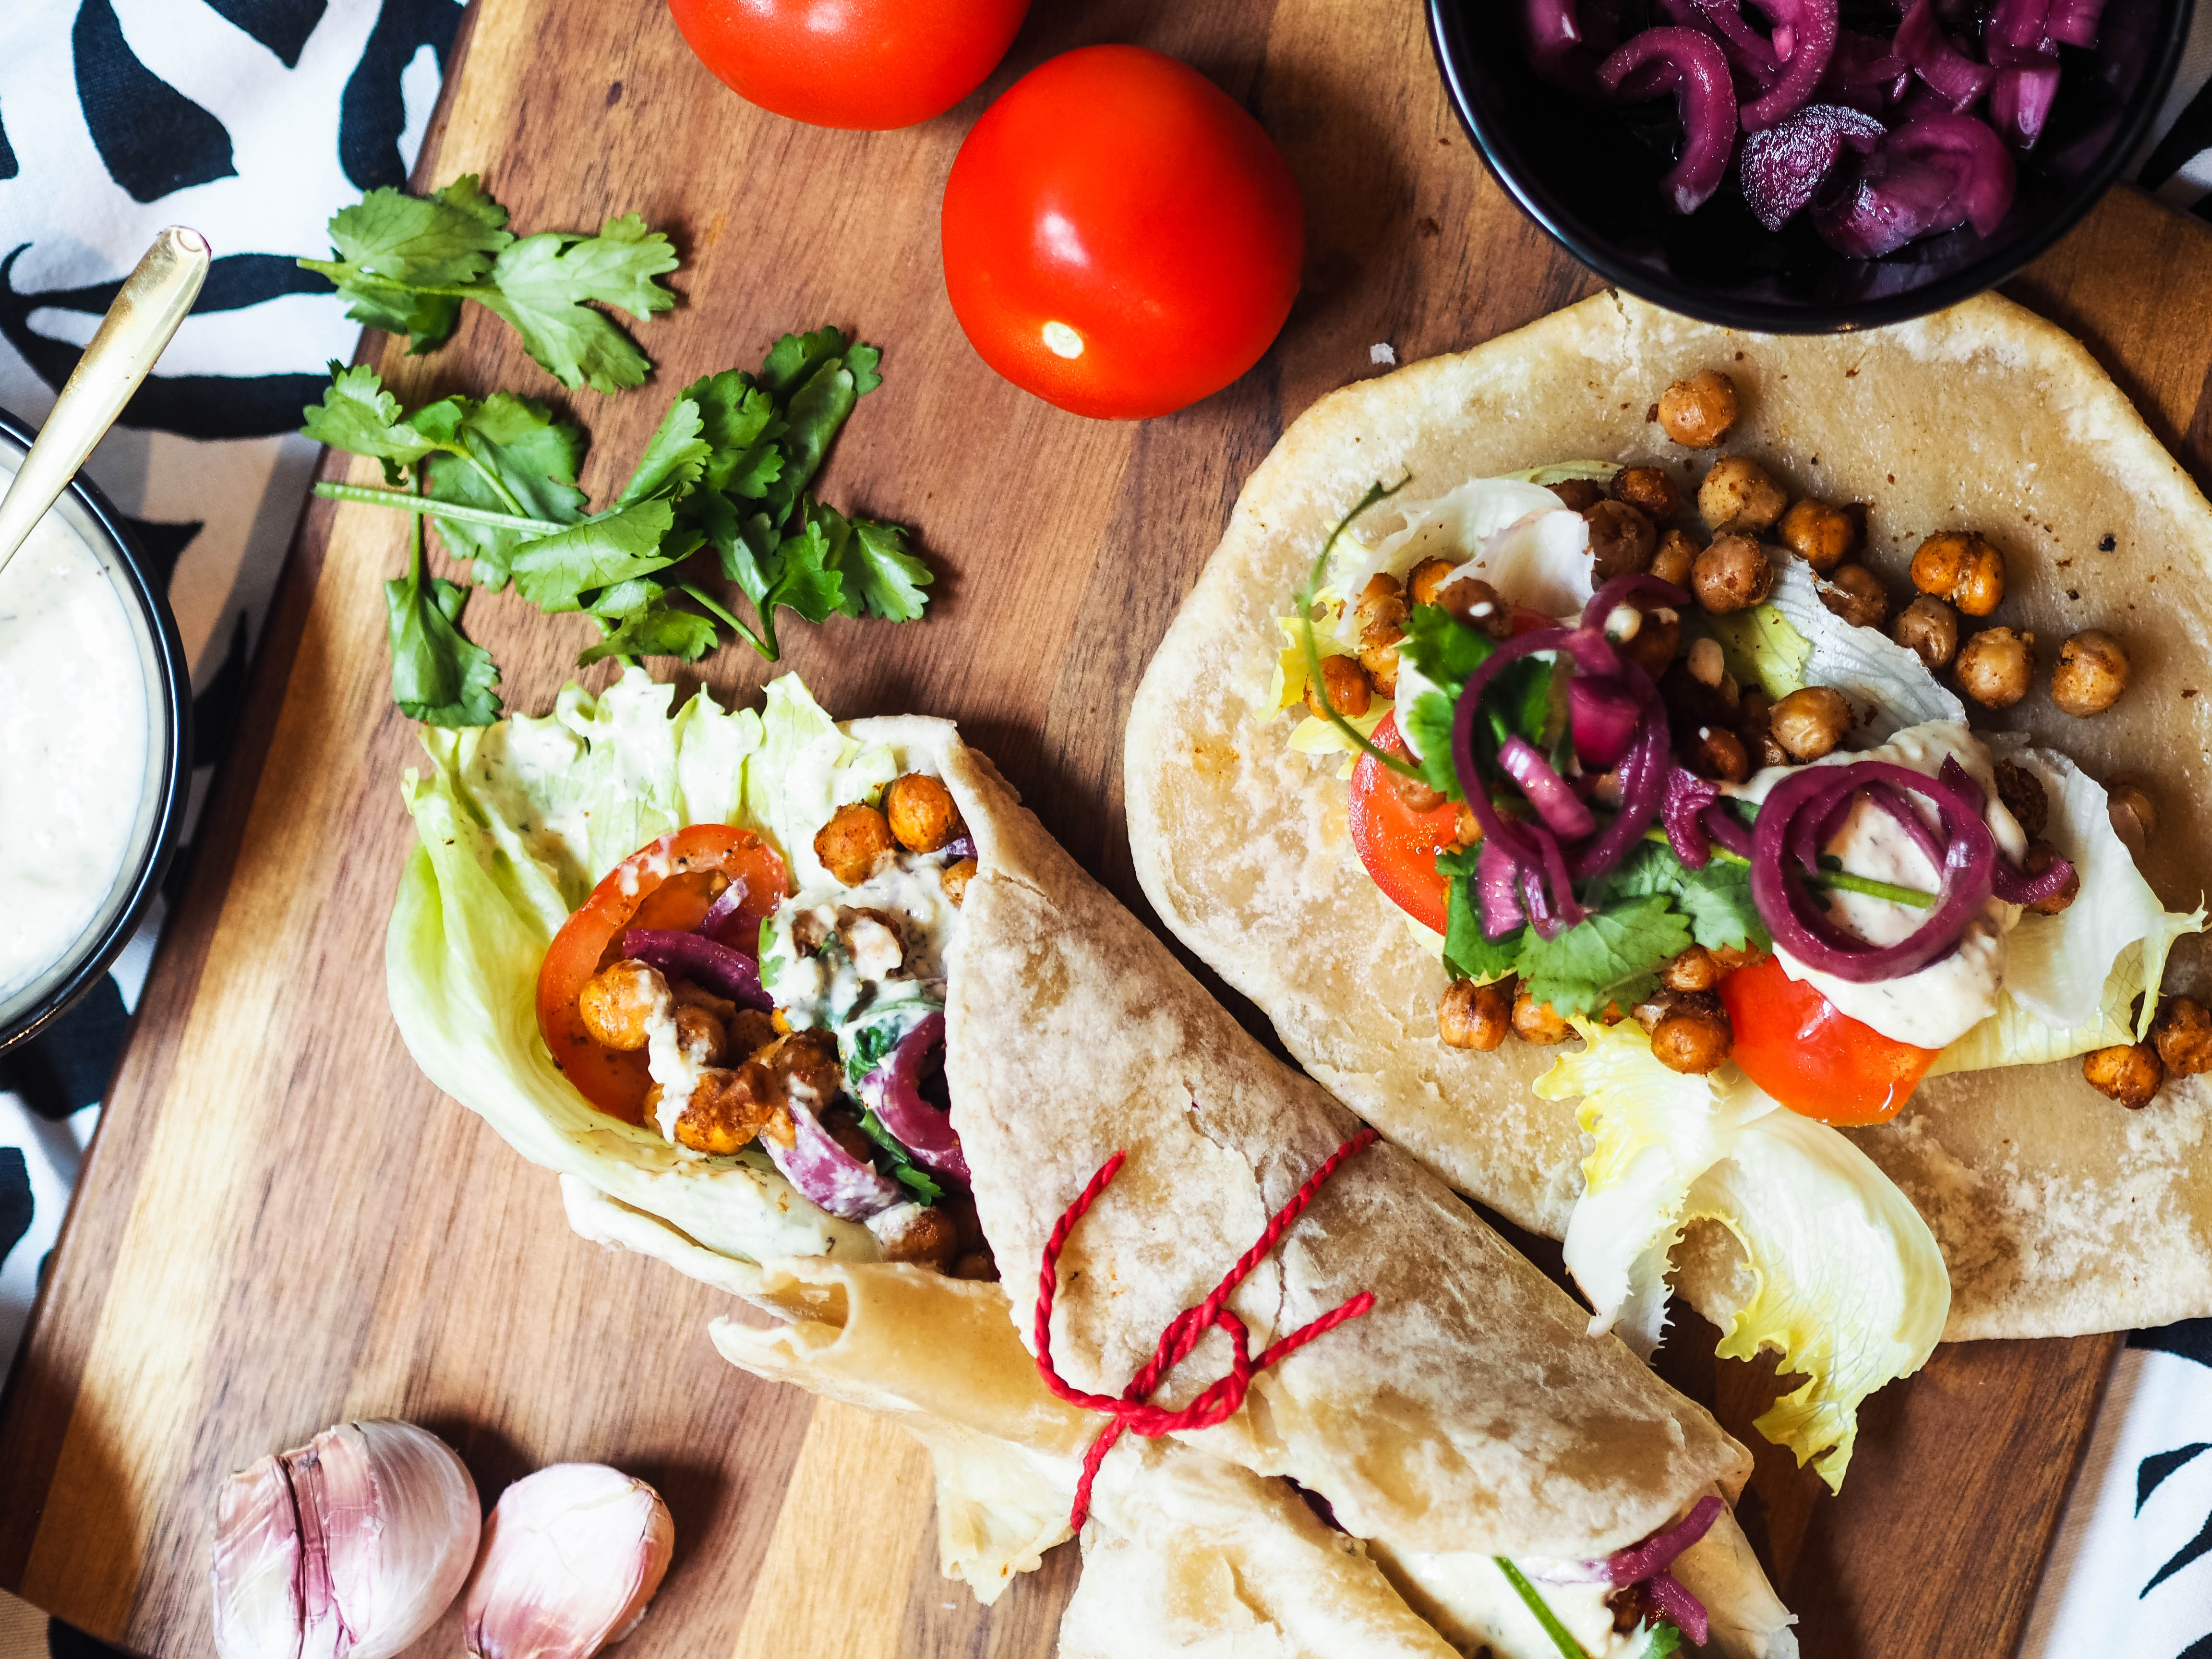 The best ever chickpea wrap - middle eastern style!